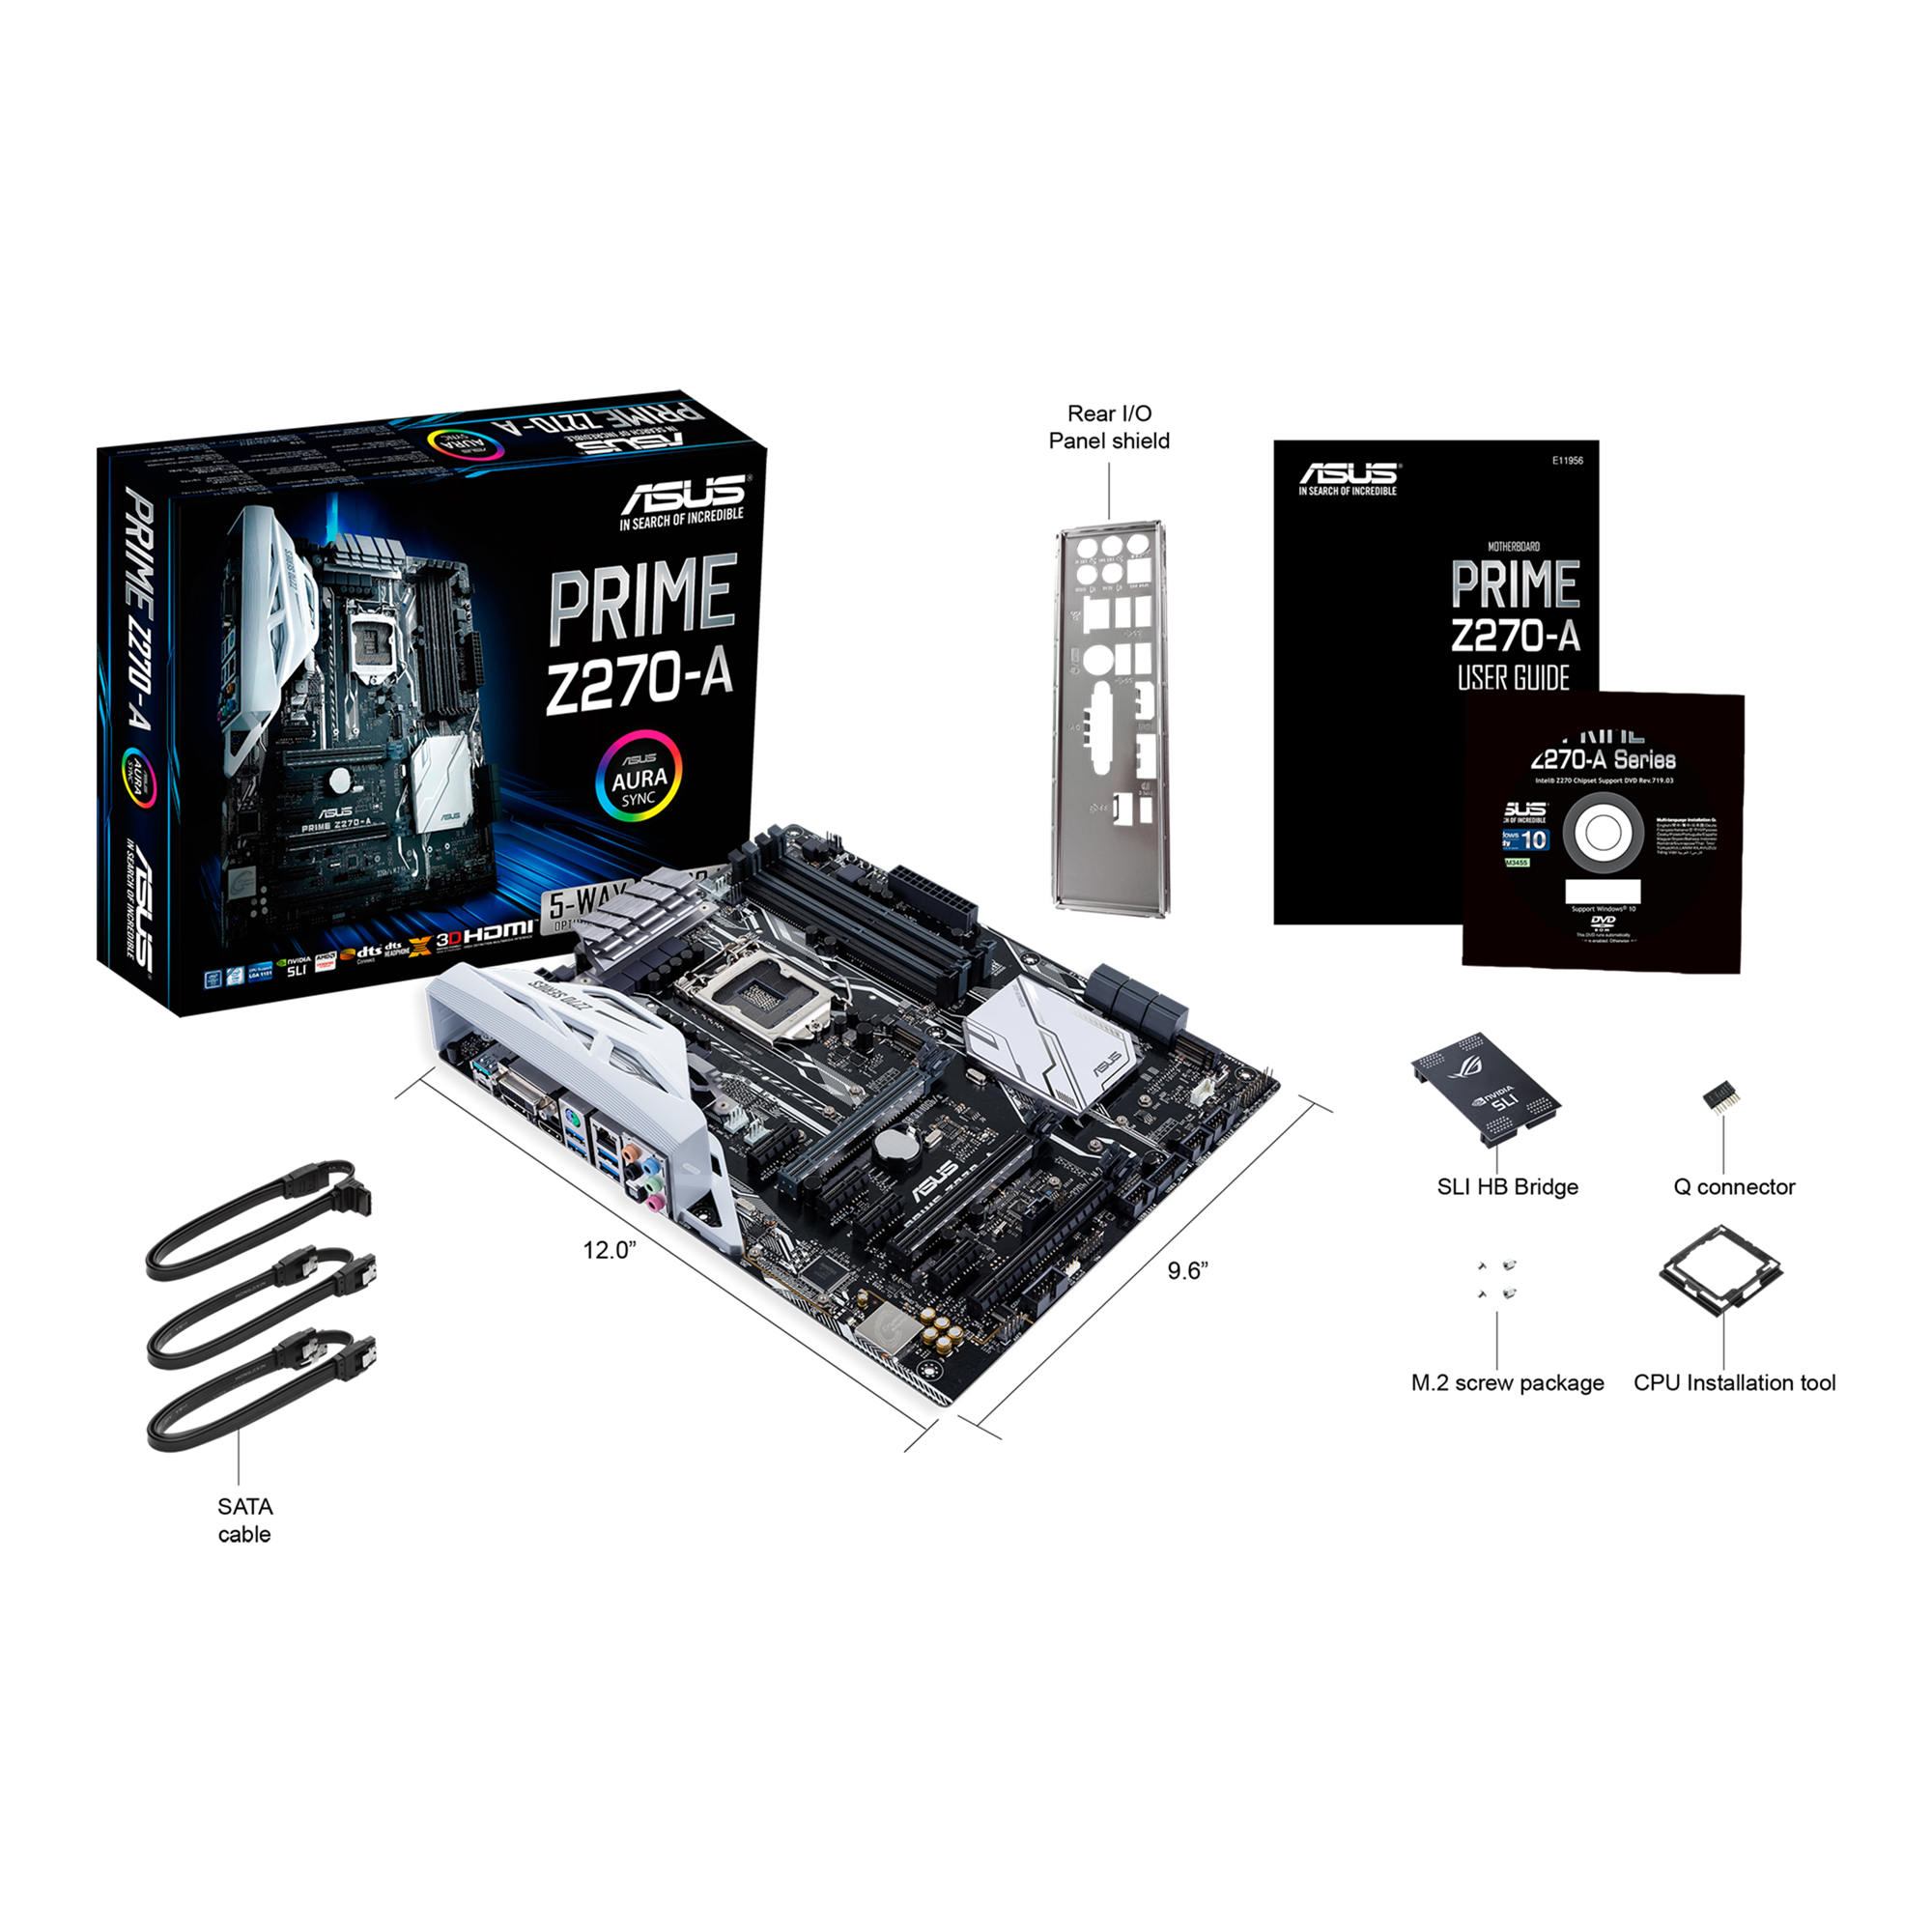 PRIME Z270-A｜Motherboards｜ASUS Canada